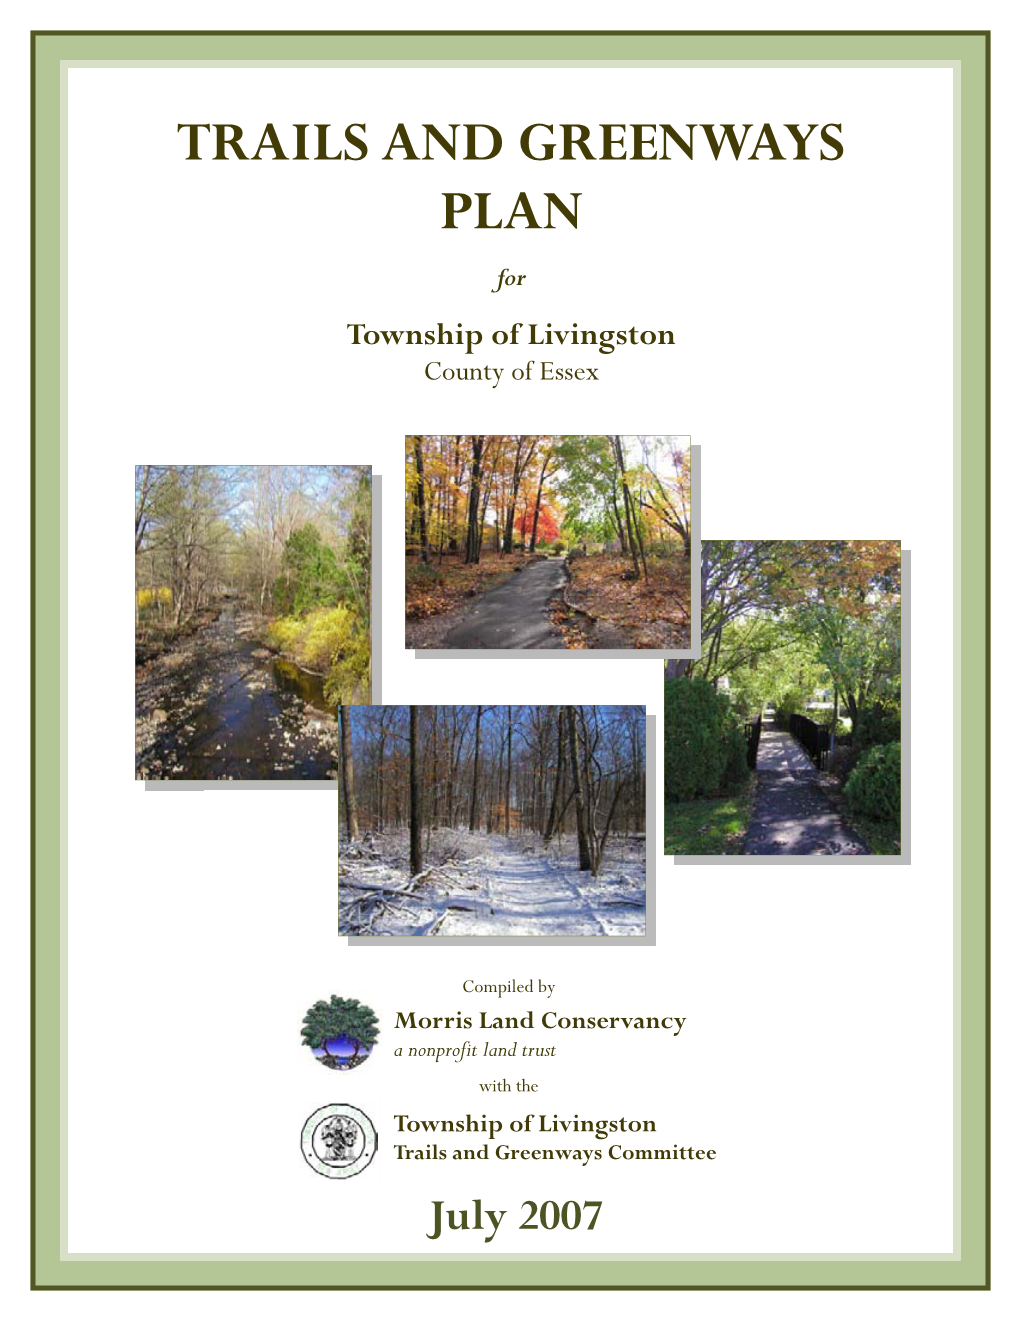 Trails and Greenways Plan, 2007